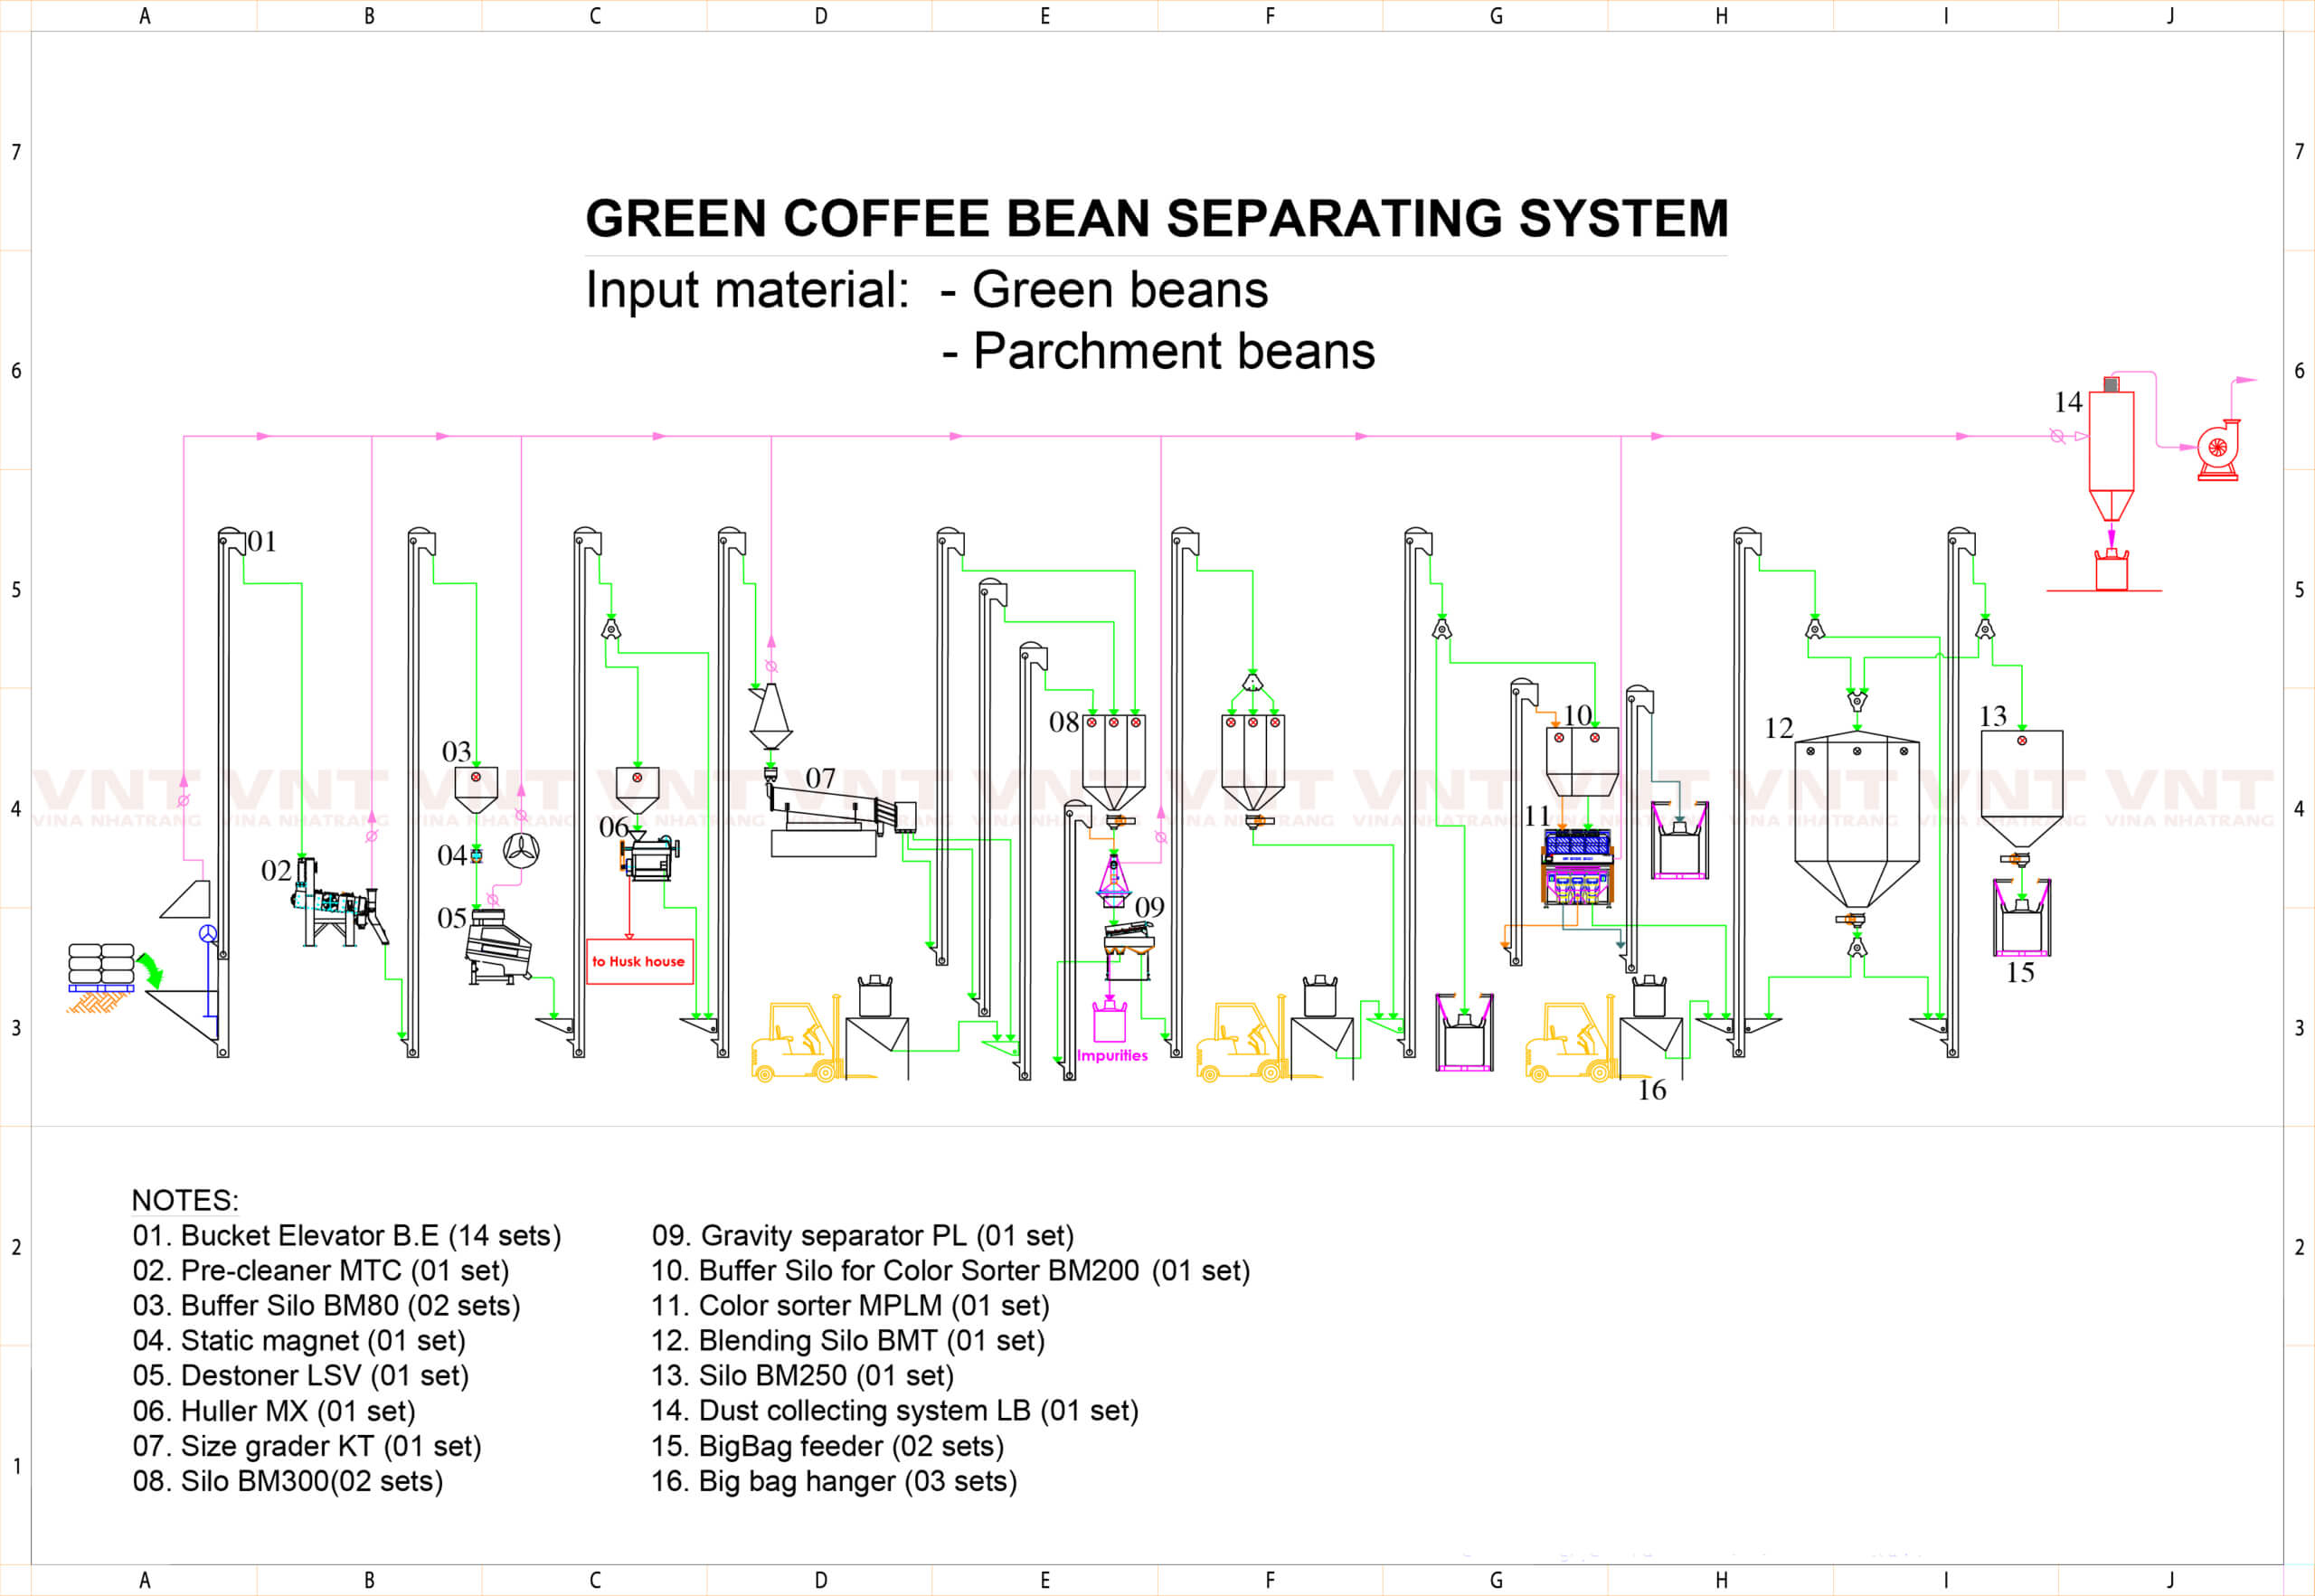 GREEN COFFEE BEAN PROCESSING SYSTEM